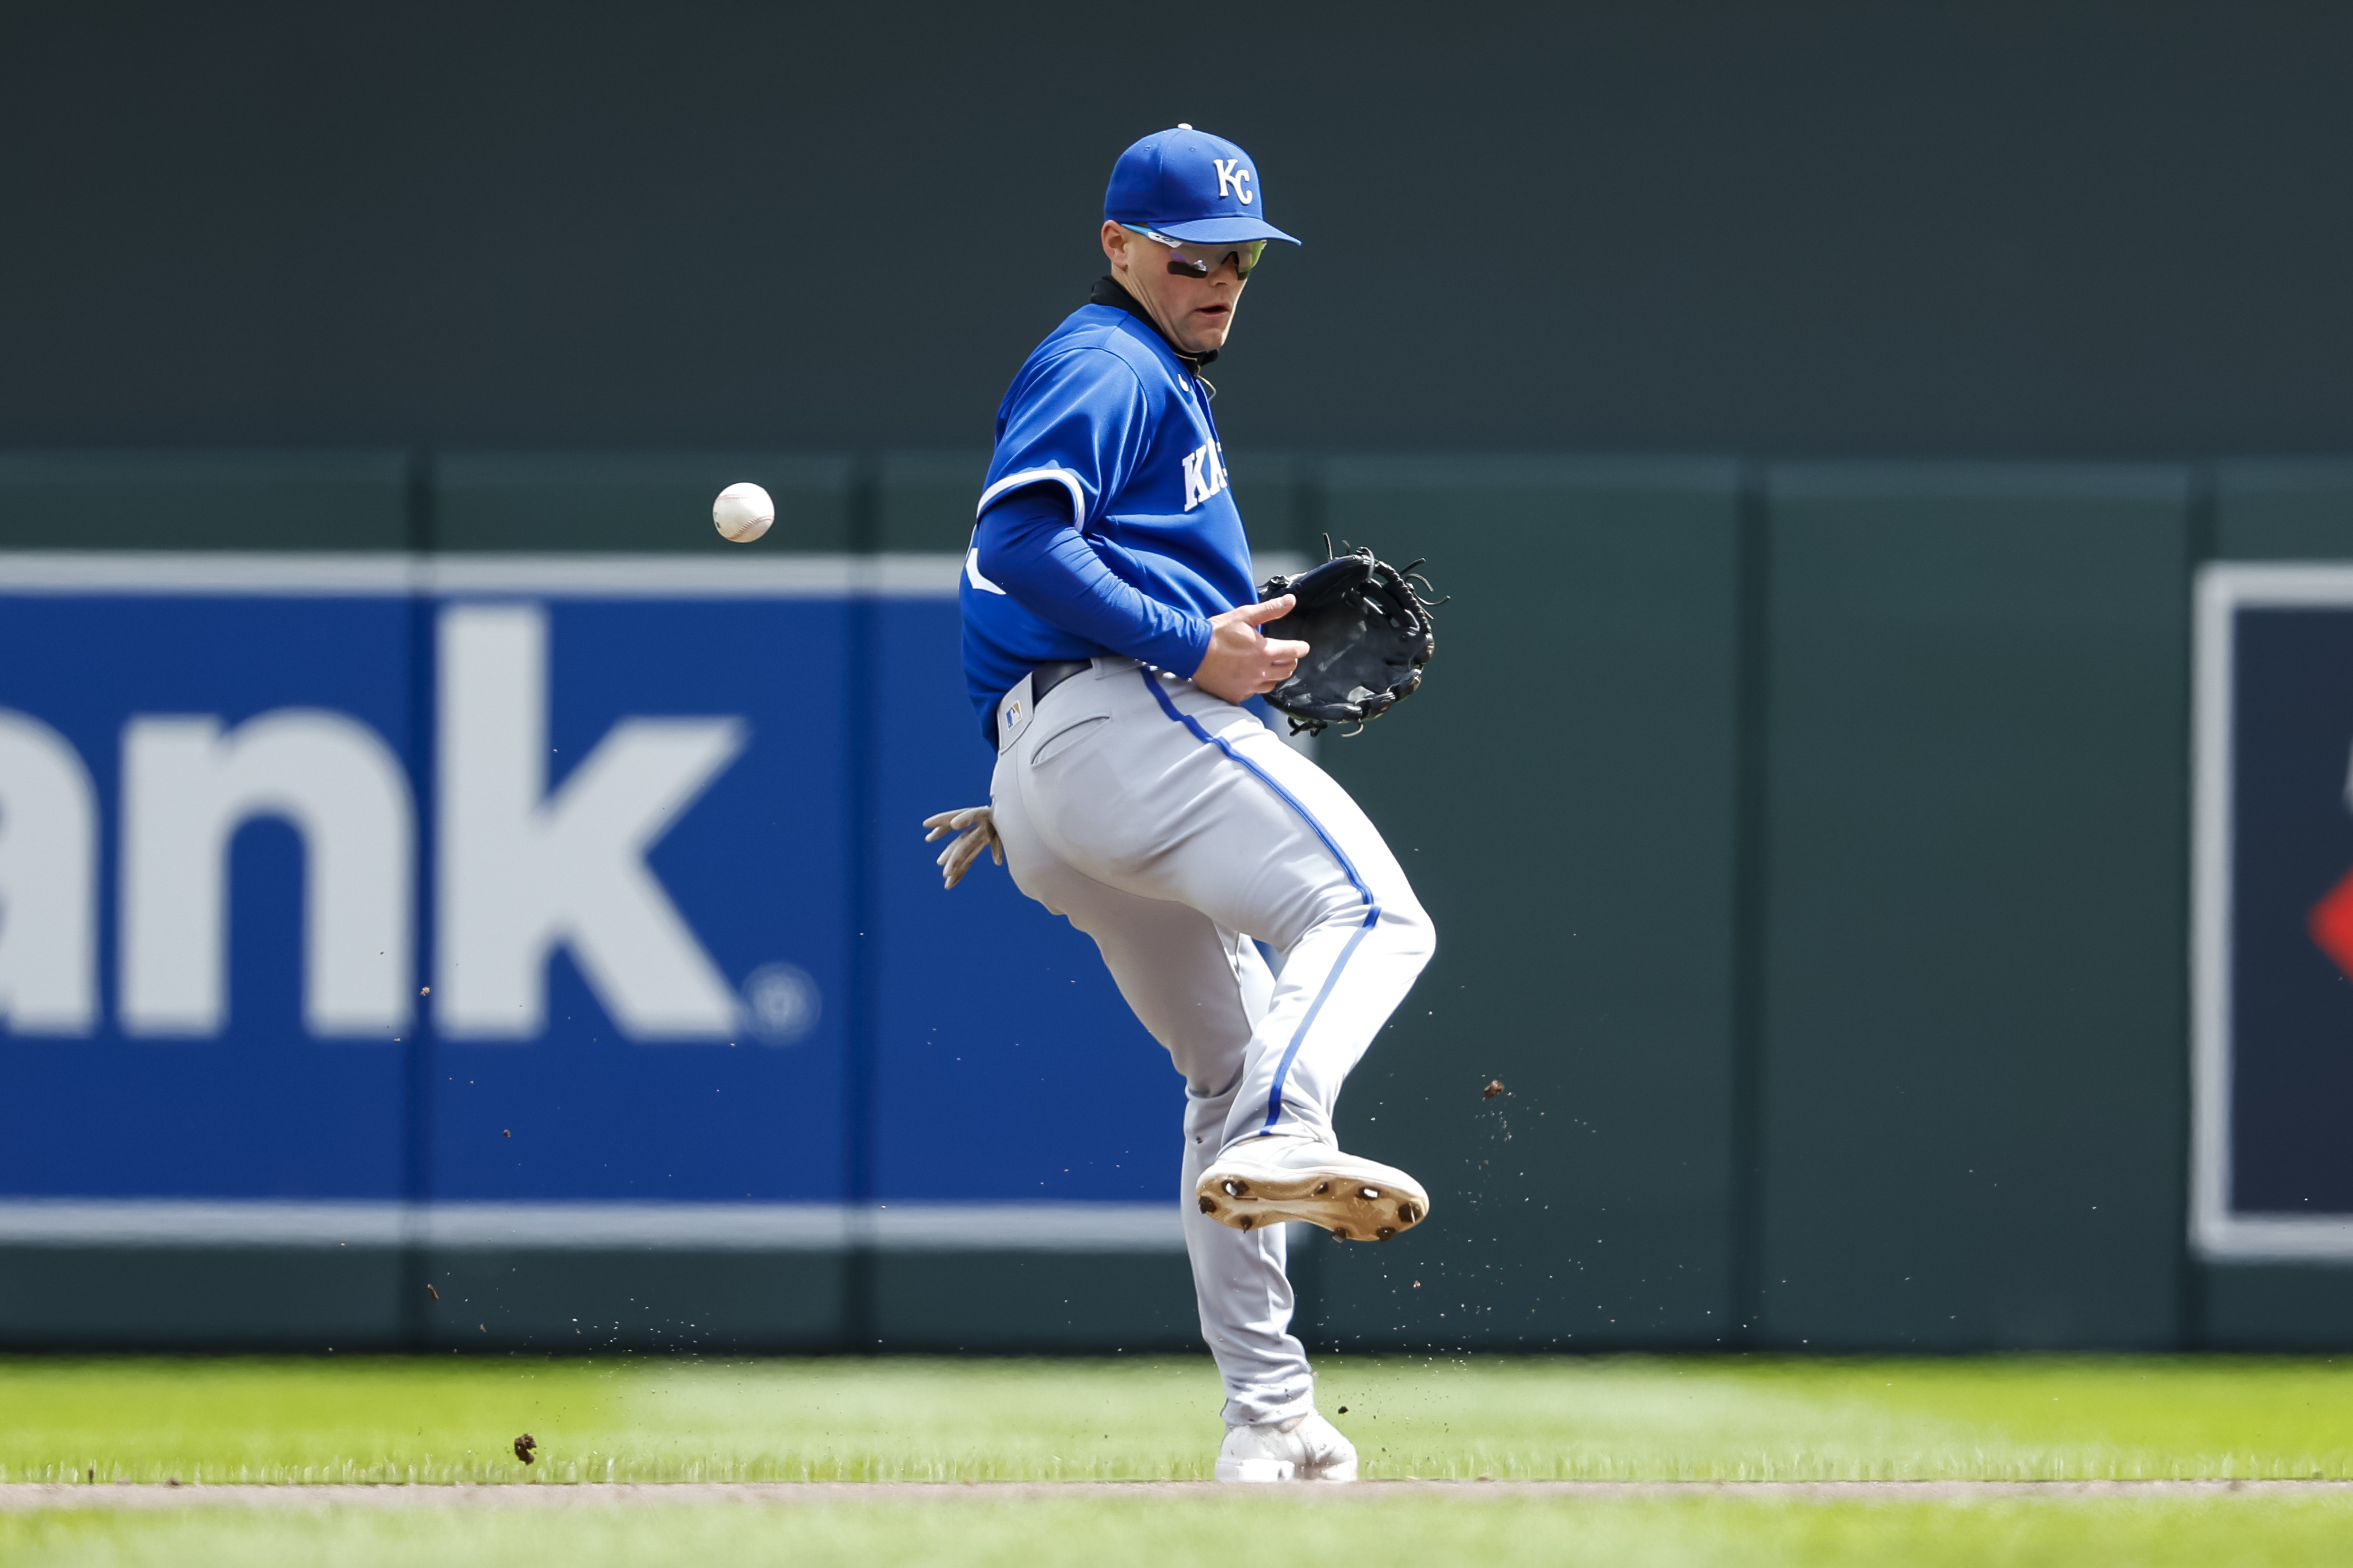 Michael Massey #19 of the Kansas City Royals commits a fielding error on a ball hit by Carlos Correa #4 of the Minnesota Twins in the fifth inning at Target Field on April 29, 2023 in Minneapolis, Minnesota. The Royals defeated the Twins 3-2.